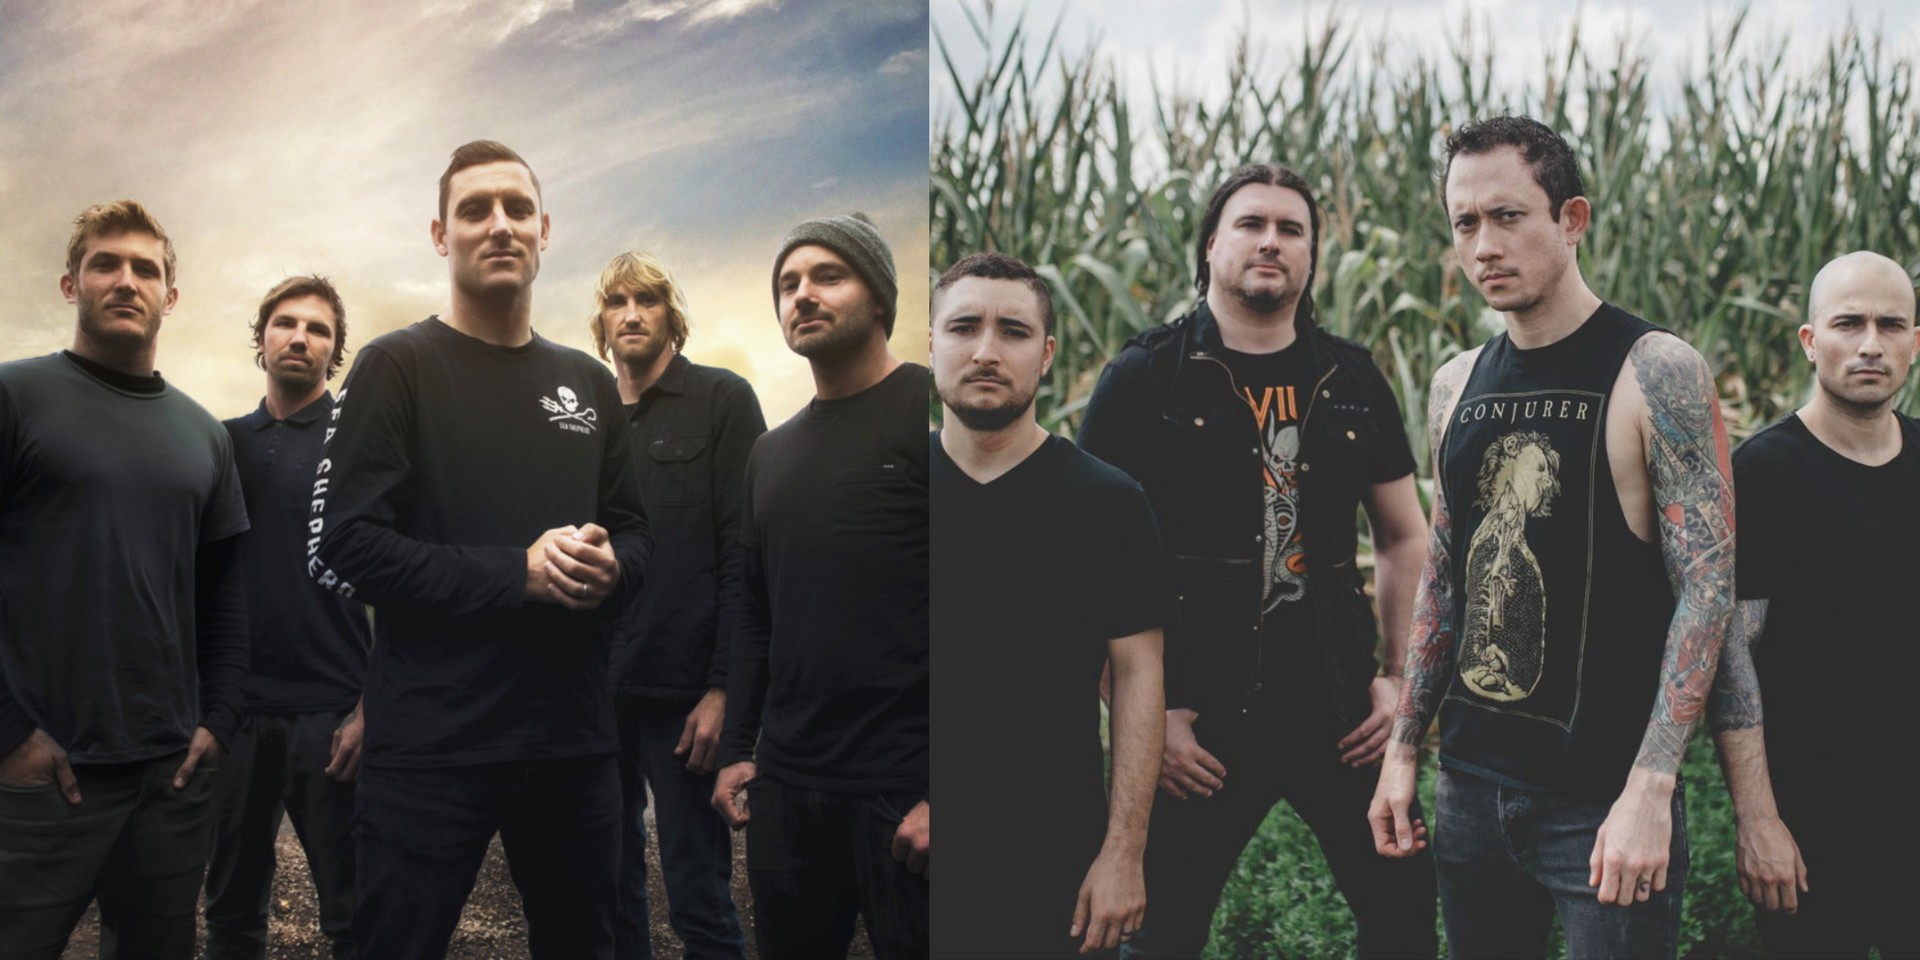 Good Things Festival Australia announces line-up – Parkway Drive, Trivium, A Day To Remember and more 